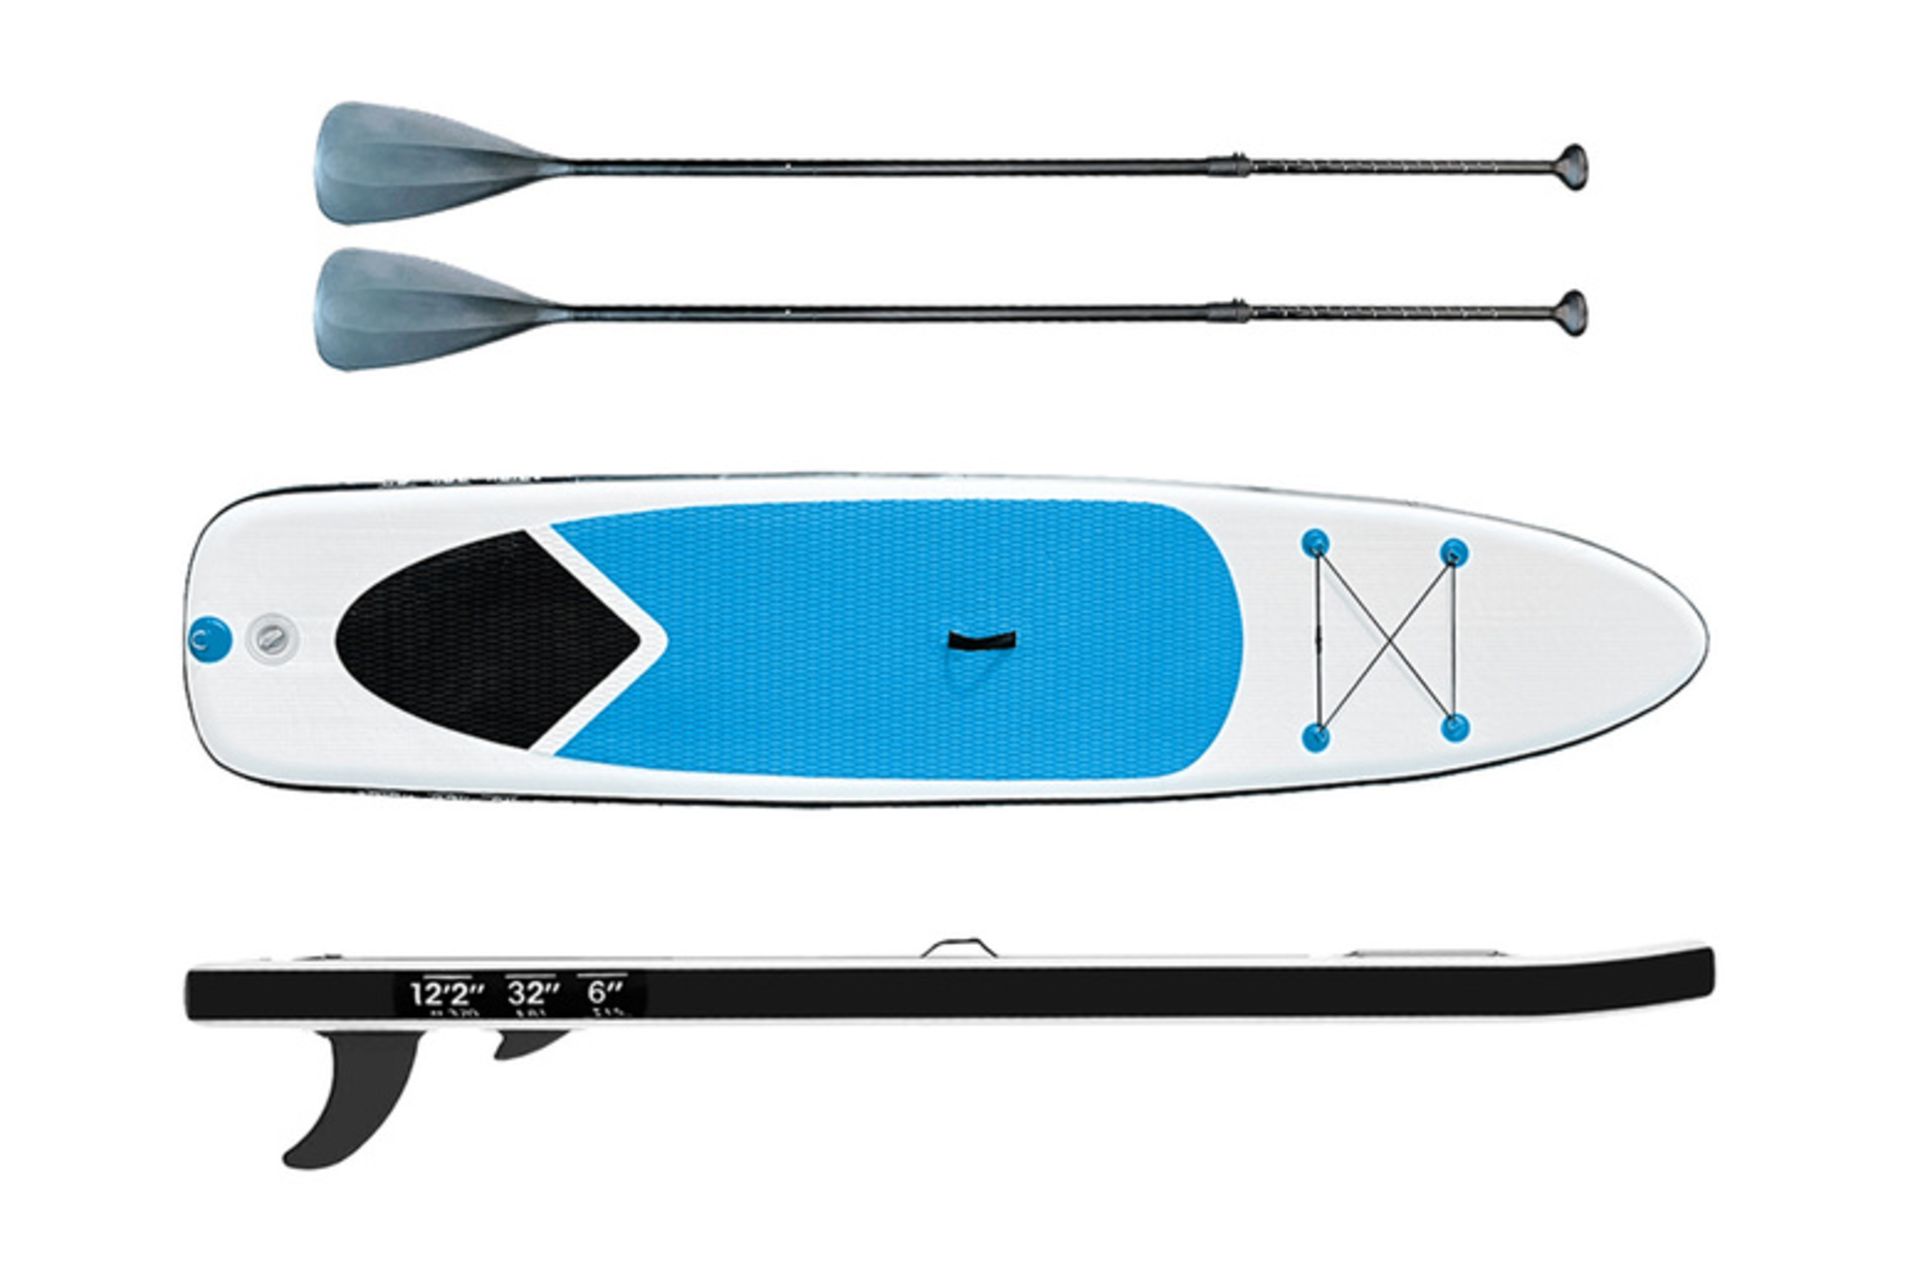 FREE DELIVERY - JOB LOT 5X LARGE 2-PERSON INFLATABLE PADDLE BOARD W/ ACCESSORIES - BLUE